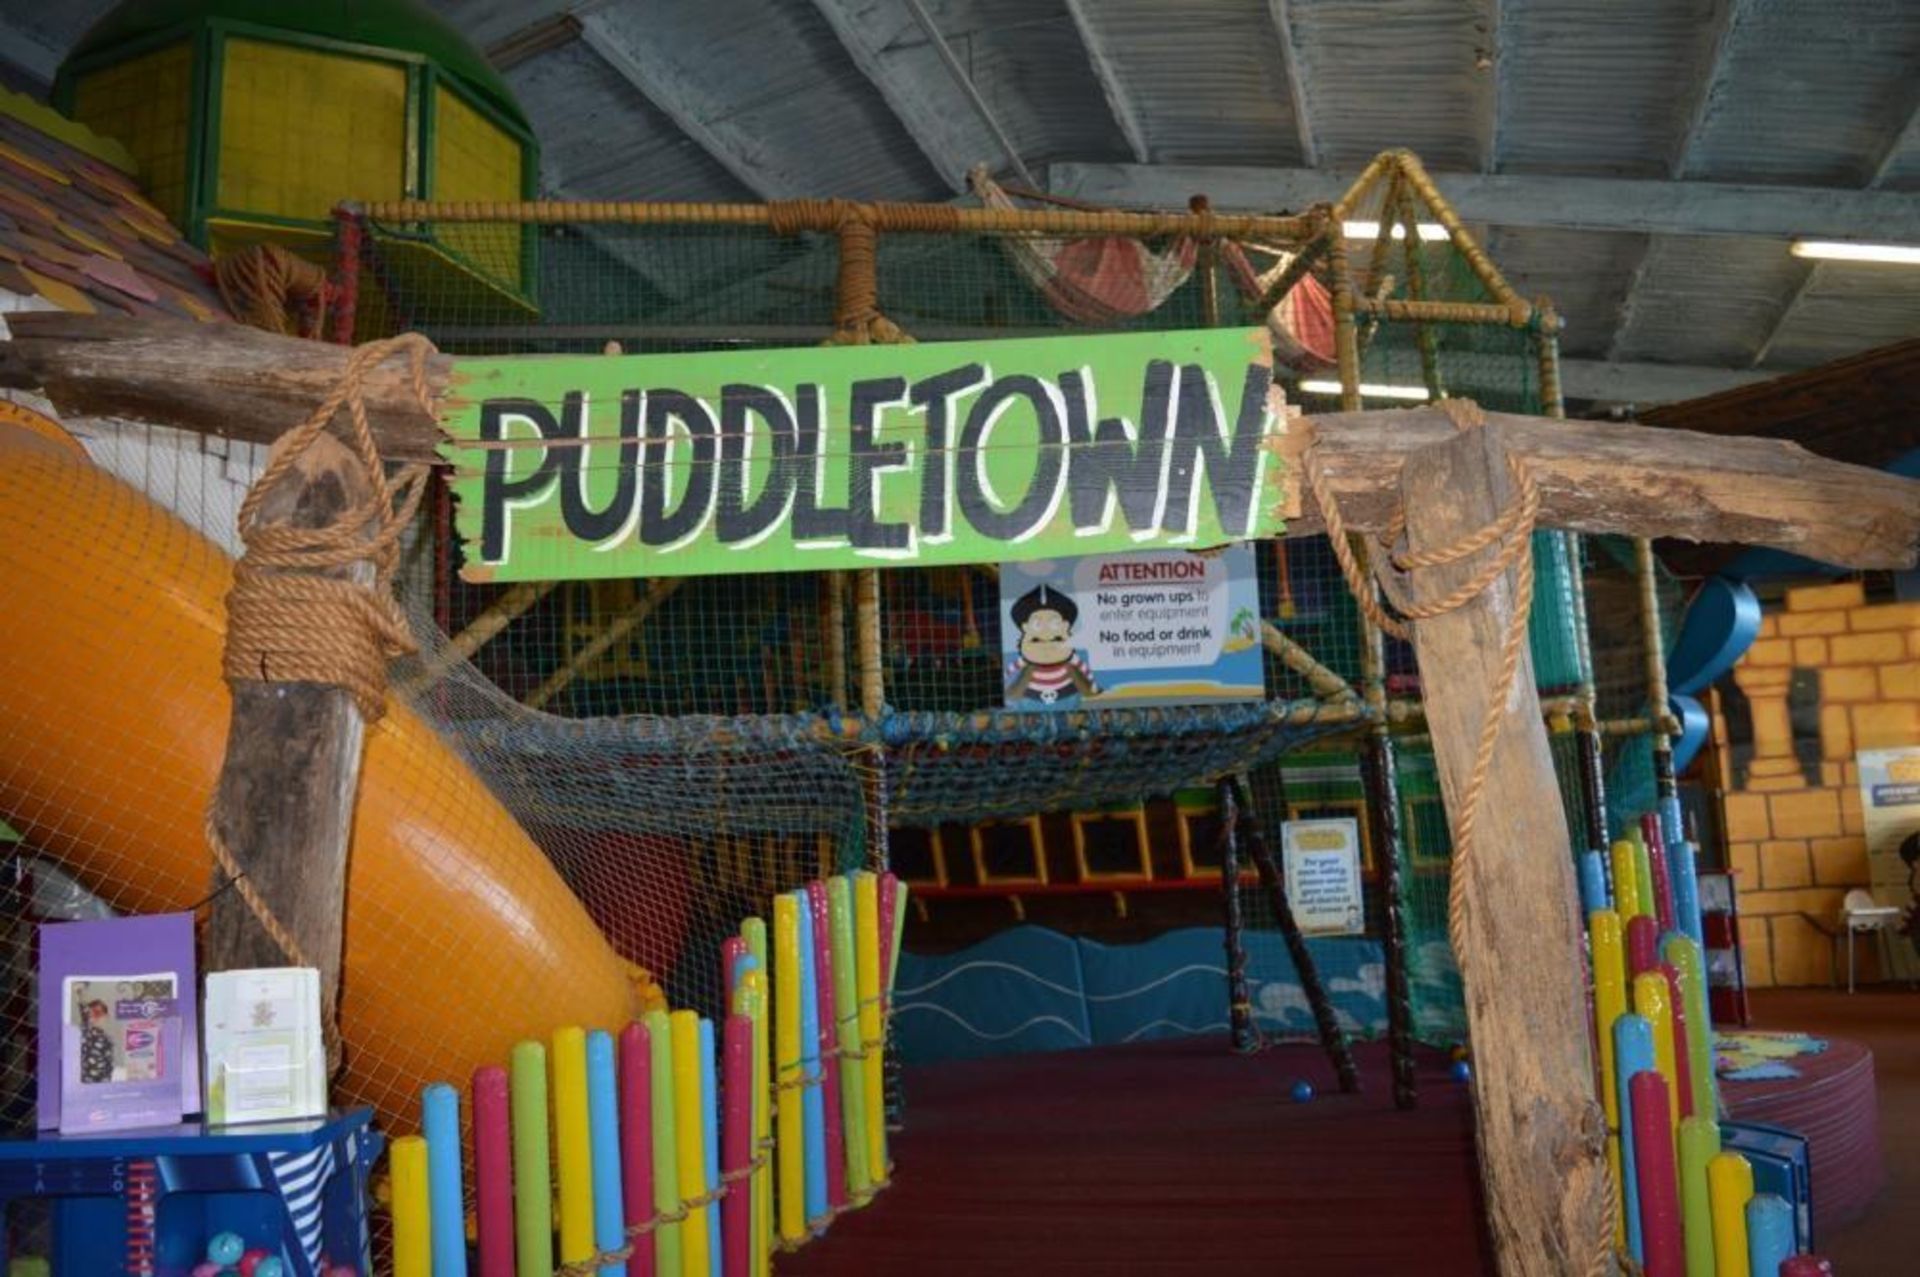 Puddletown Pirates Childrens Play Centre - Features Large Indoor Ball Pit, Huge Amount of Balls, Fun - Image 23 of 30